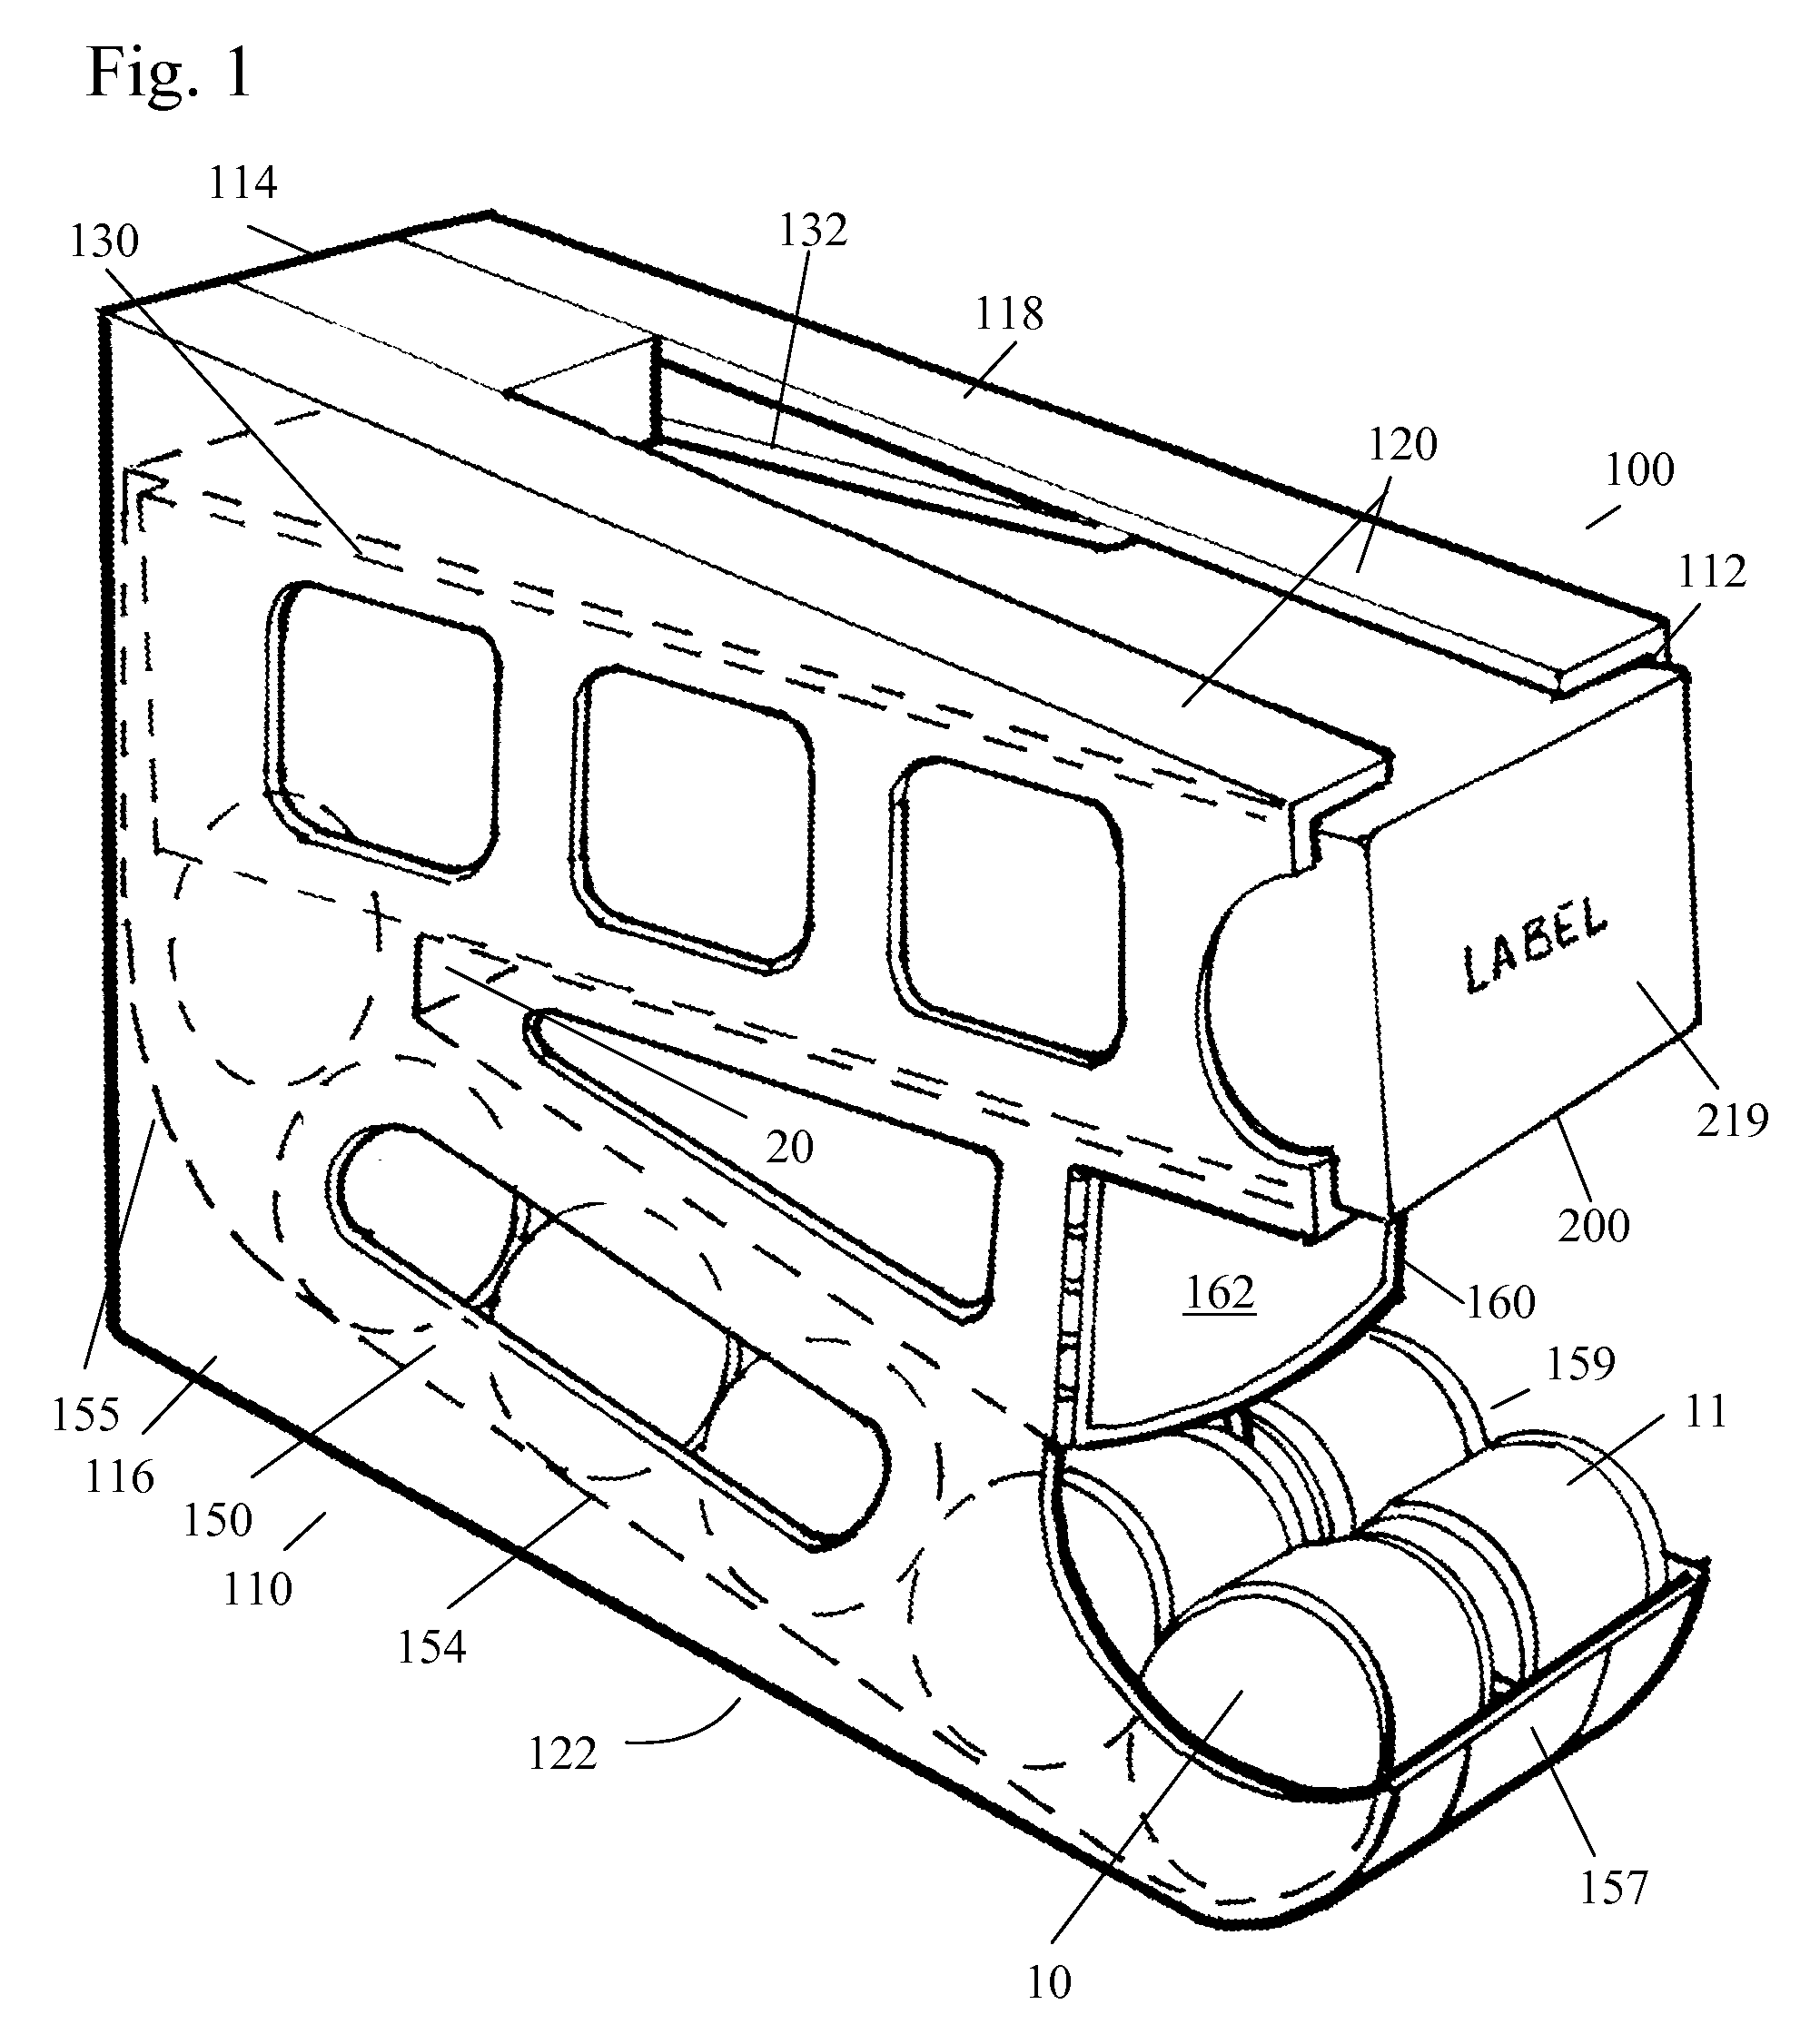 Product dispenser assembly and cartridge for holding product